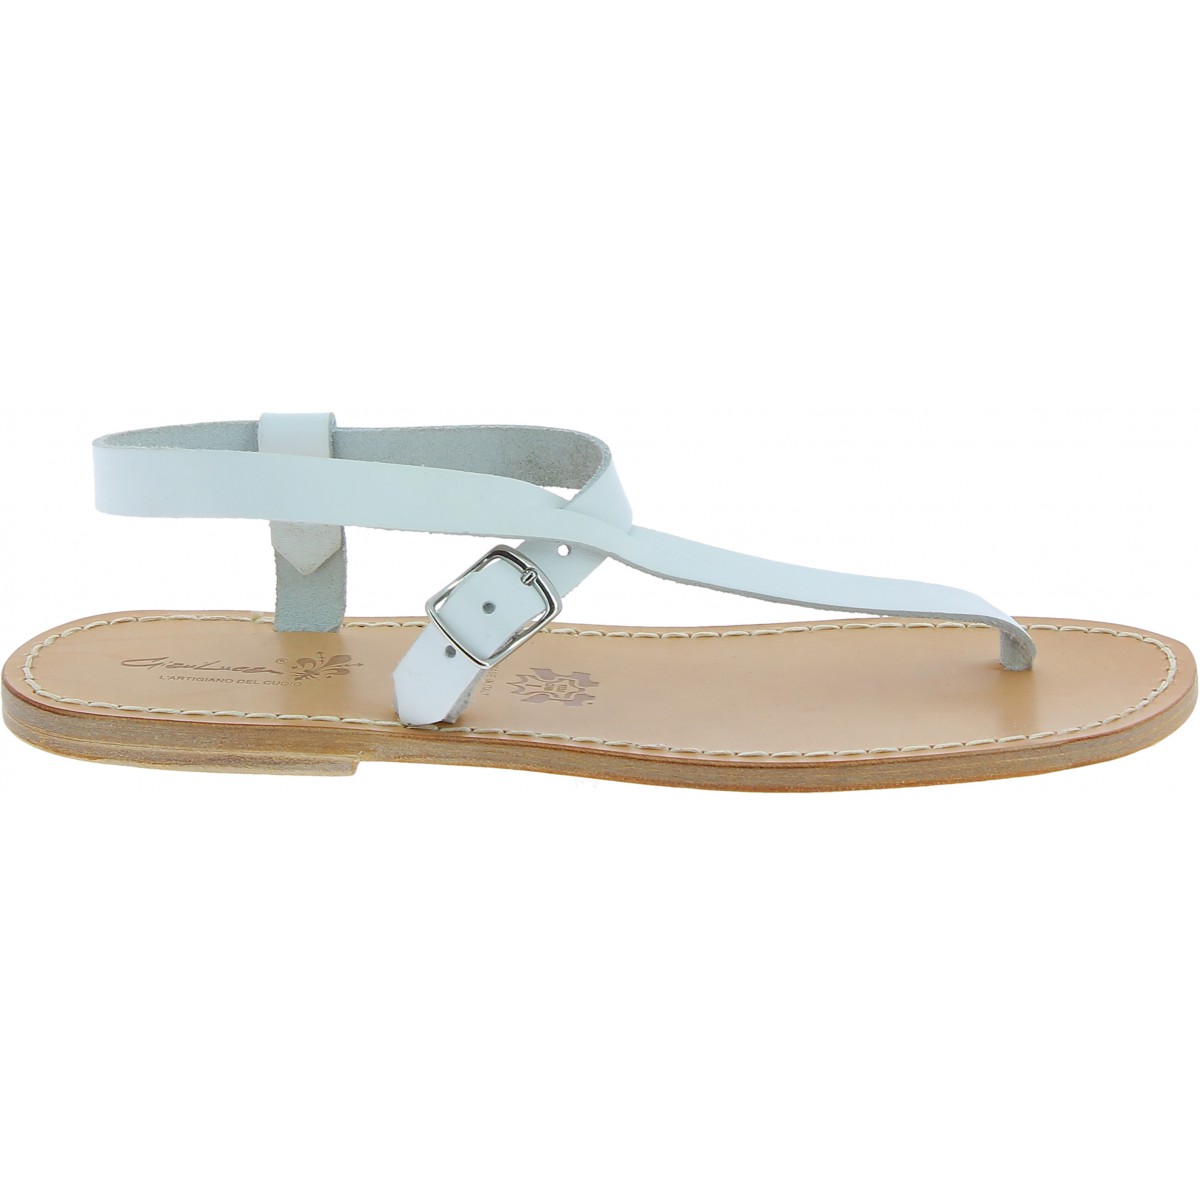 mens white leather thong sandals